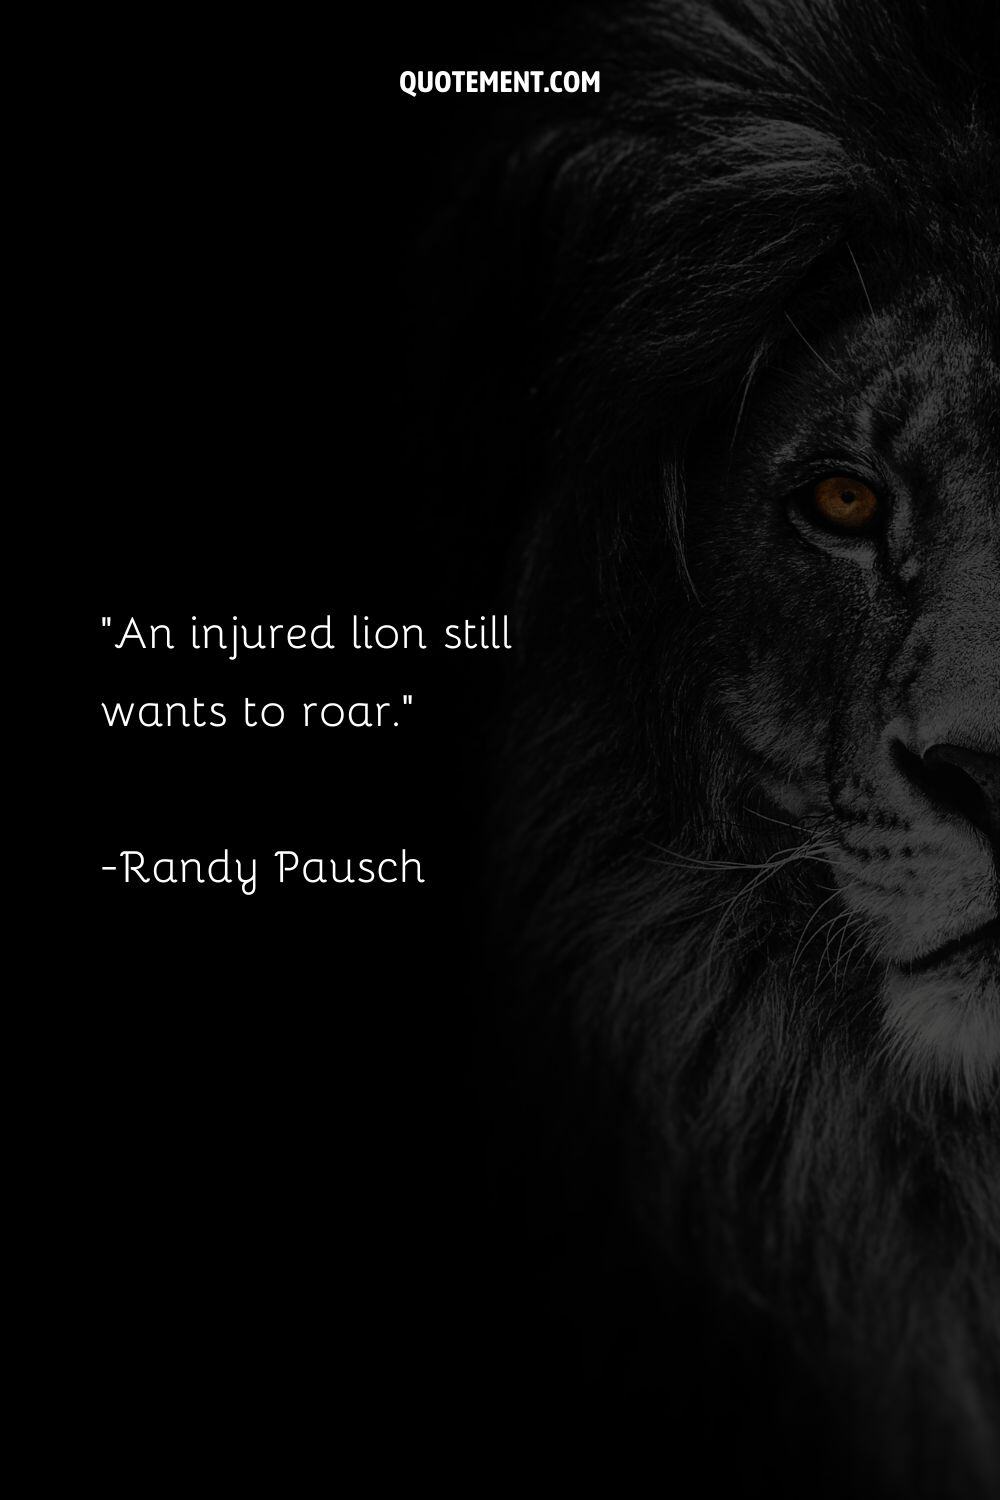 image of half of lion's head representing lion mentality quote